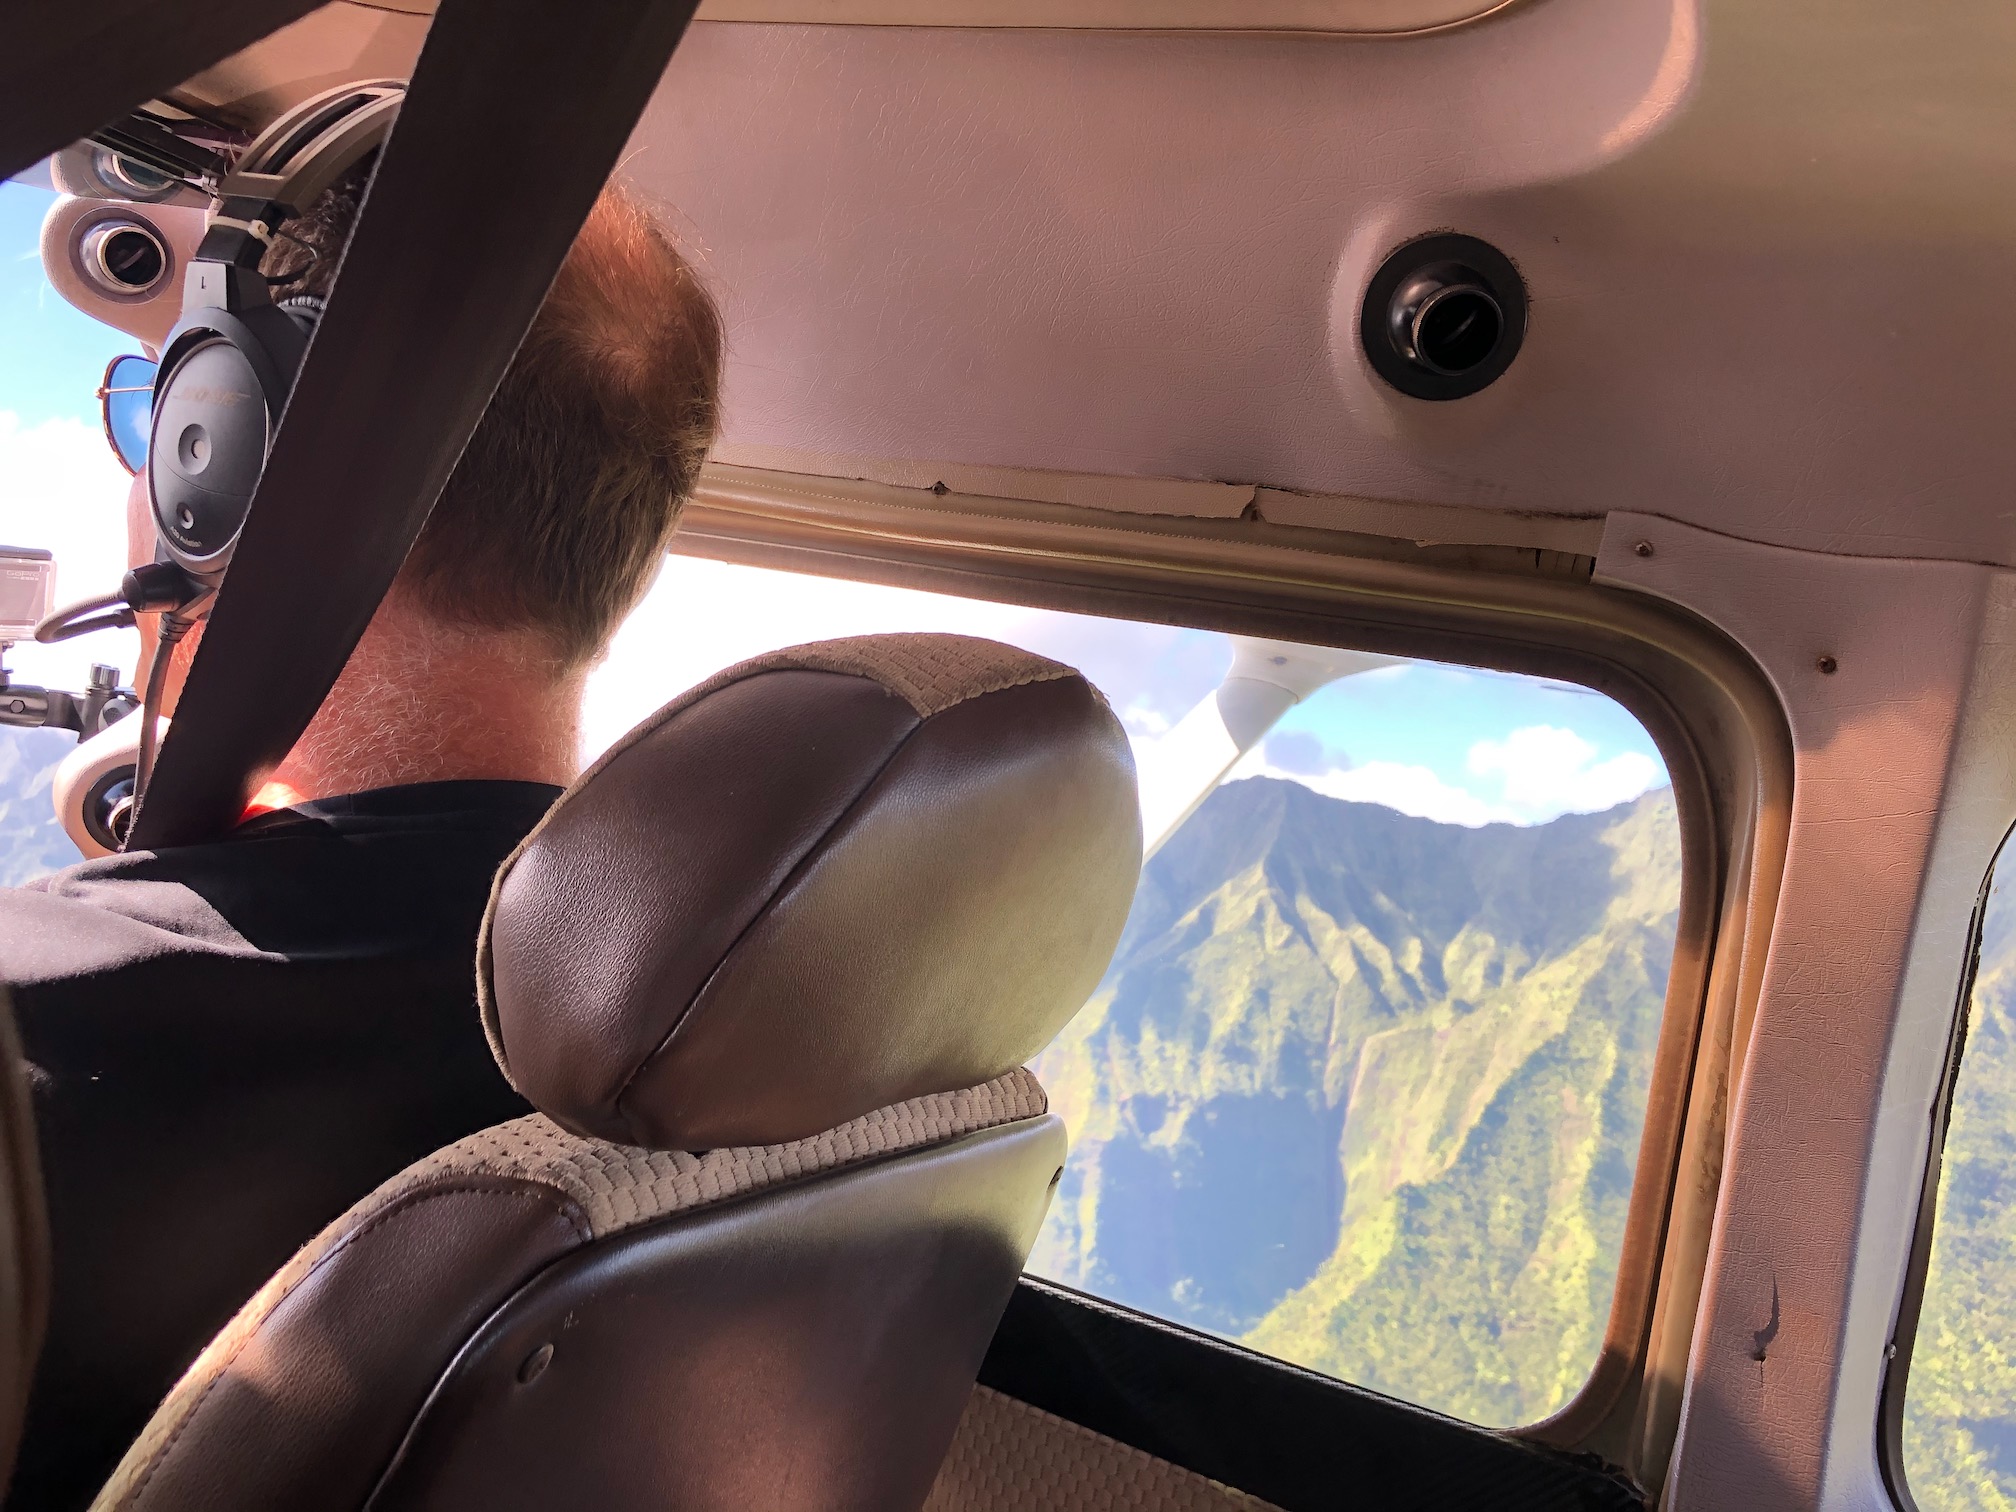 hunter flying overlooking central mountains